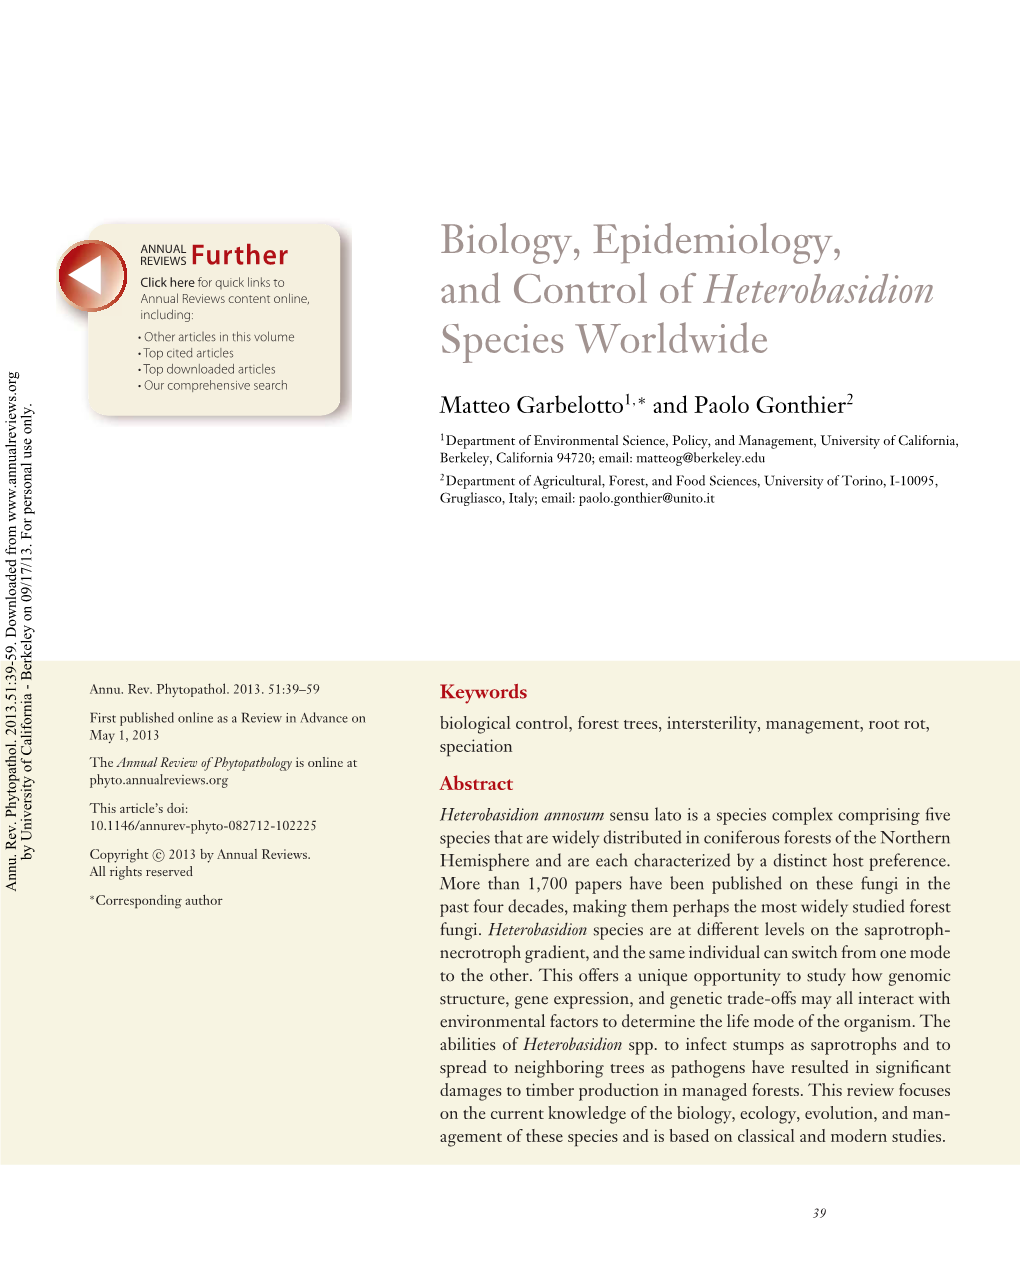 Biology, Epidemiology, and Control of Heterobasidion Species Worldwide